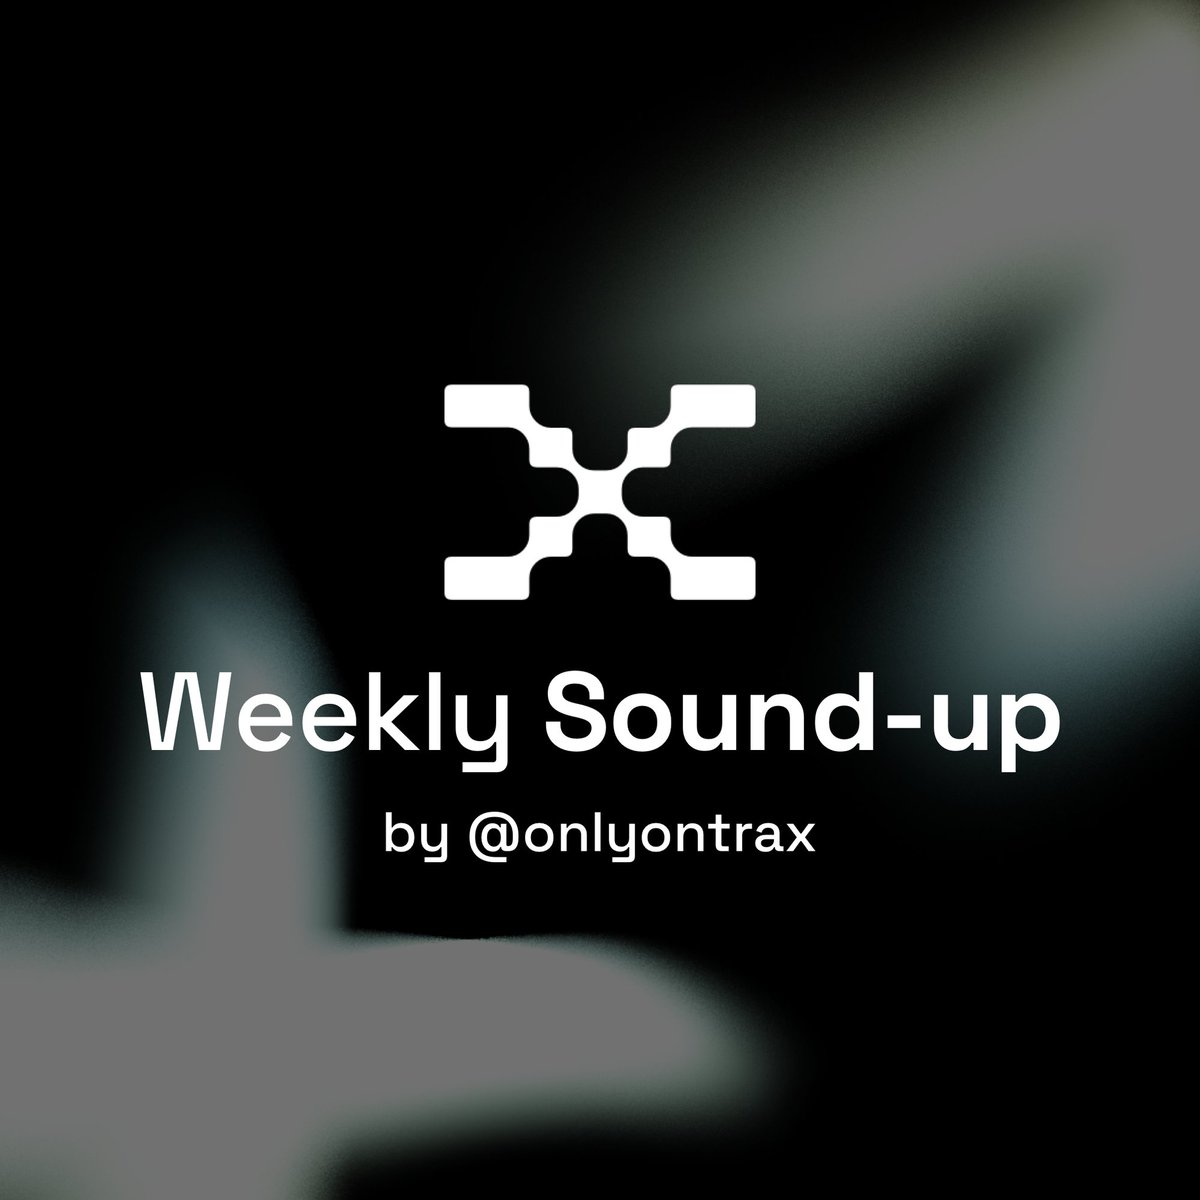 🔥 WEEKLY SOUND-UP OUT NOW! 🔥 

Featuring our favourite sounds from TRAX Early Birds -

1⃣ @realapolloking - Patrón 🍹

2⃣ @djlethalskillz - Yes Lawd (Nah Man) 🎛️

3⃣ @eldracorising - MEJOR ⚡️
 
4⃣ @popofmars - Situation 👨‍🚀

TAP IN! 🚨
➡️open.spotify.com/playlist/7aQl5…